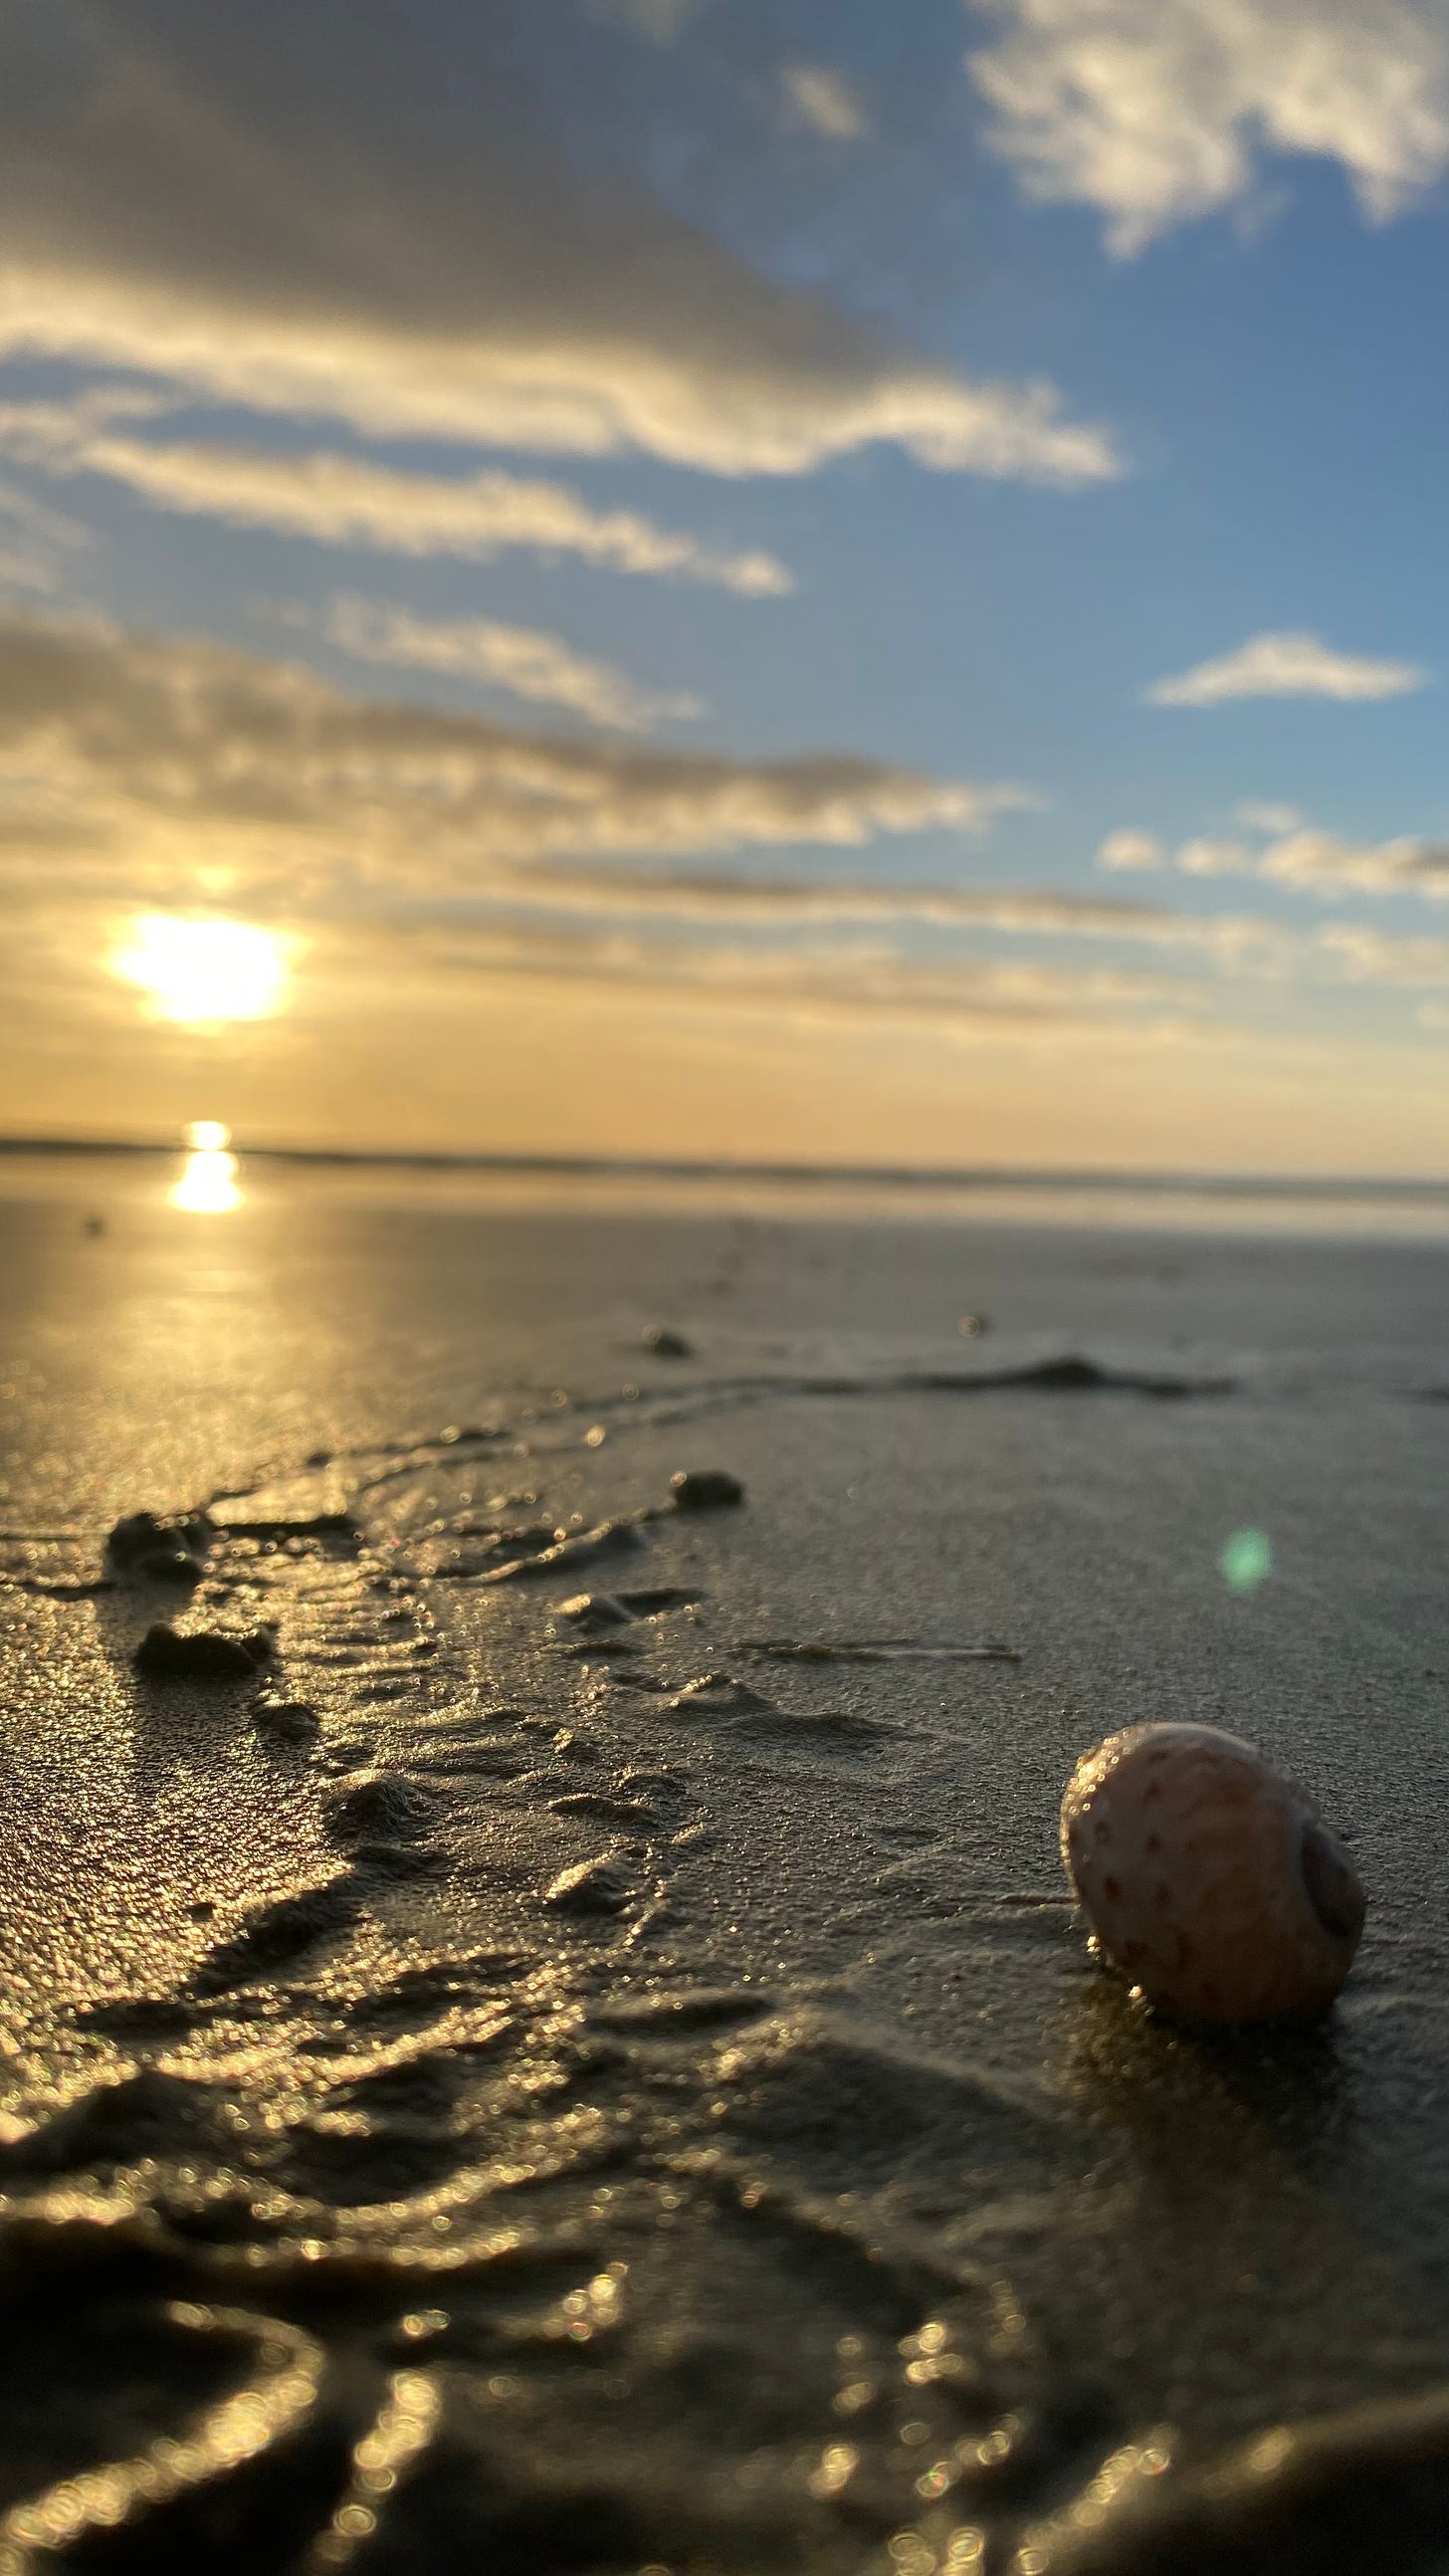 In the foreground is a sea snail on the beach, and its tracks lead into the distant sunrise